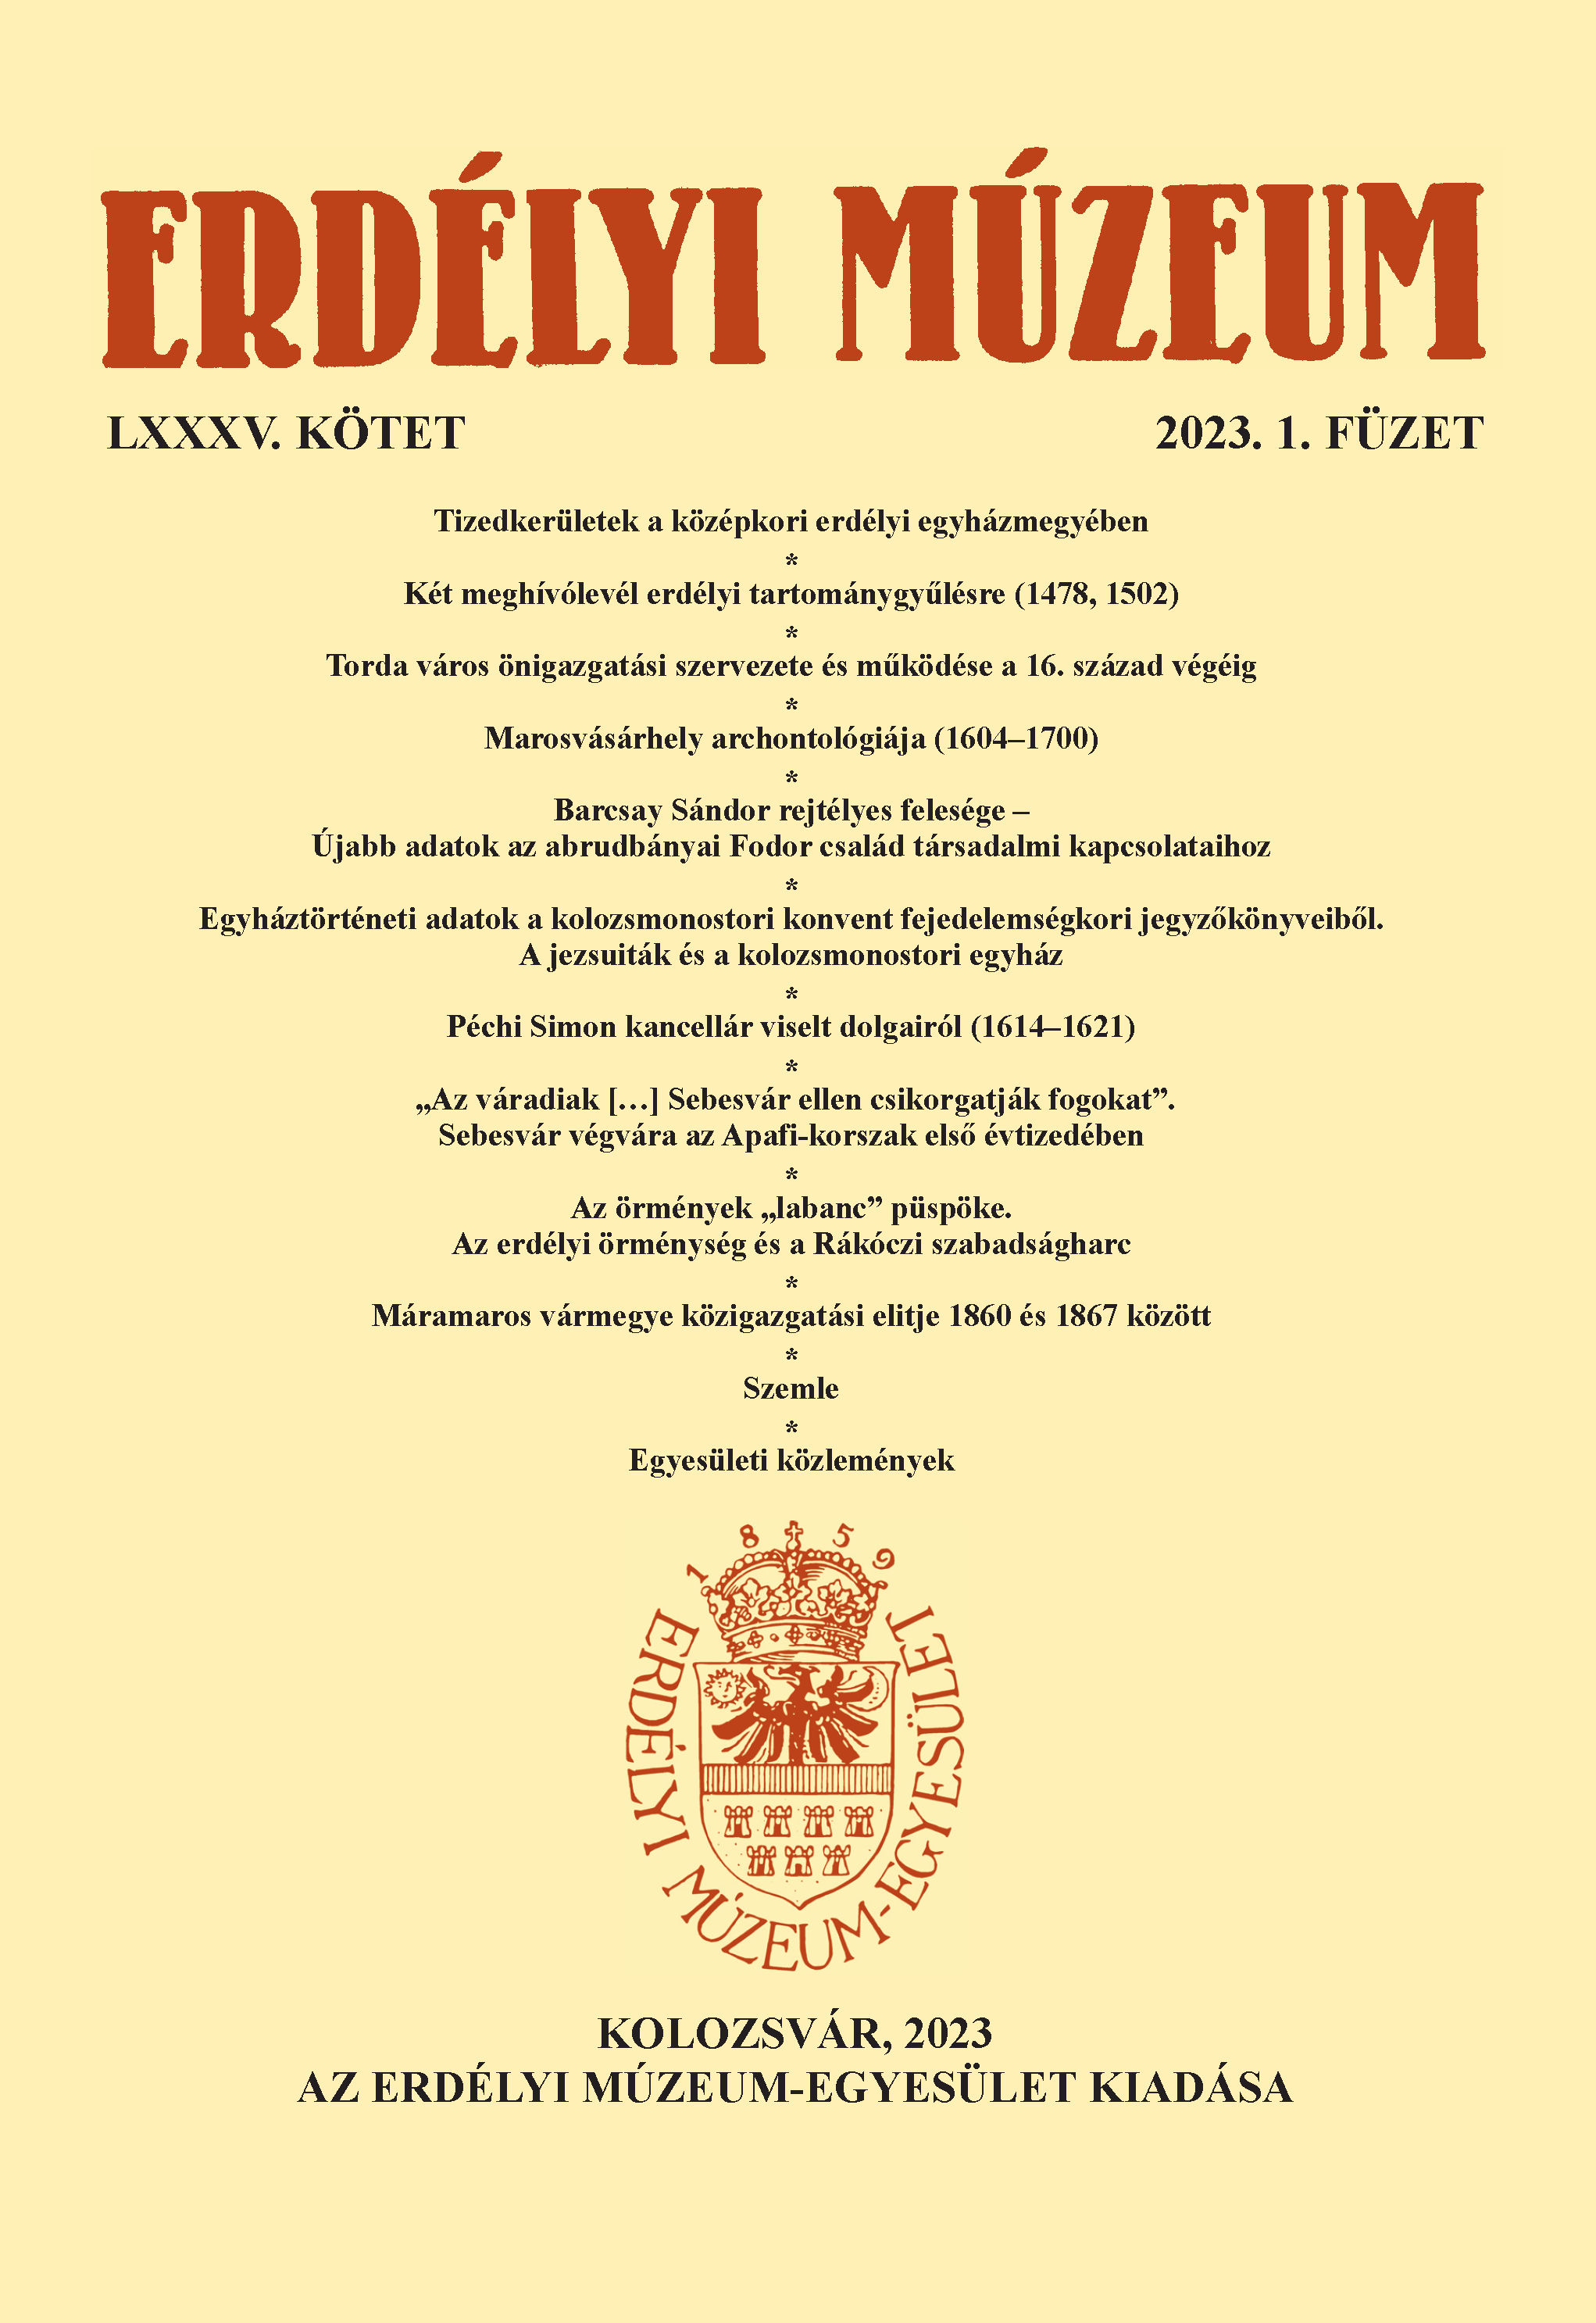 The Archontology of the Town of Târgu Mureș/Marosvásárhely Cover Image